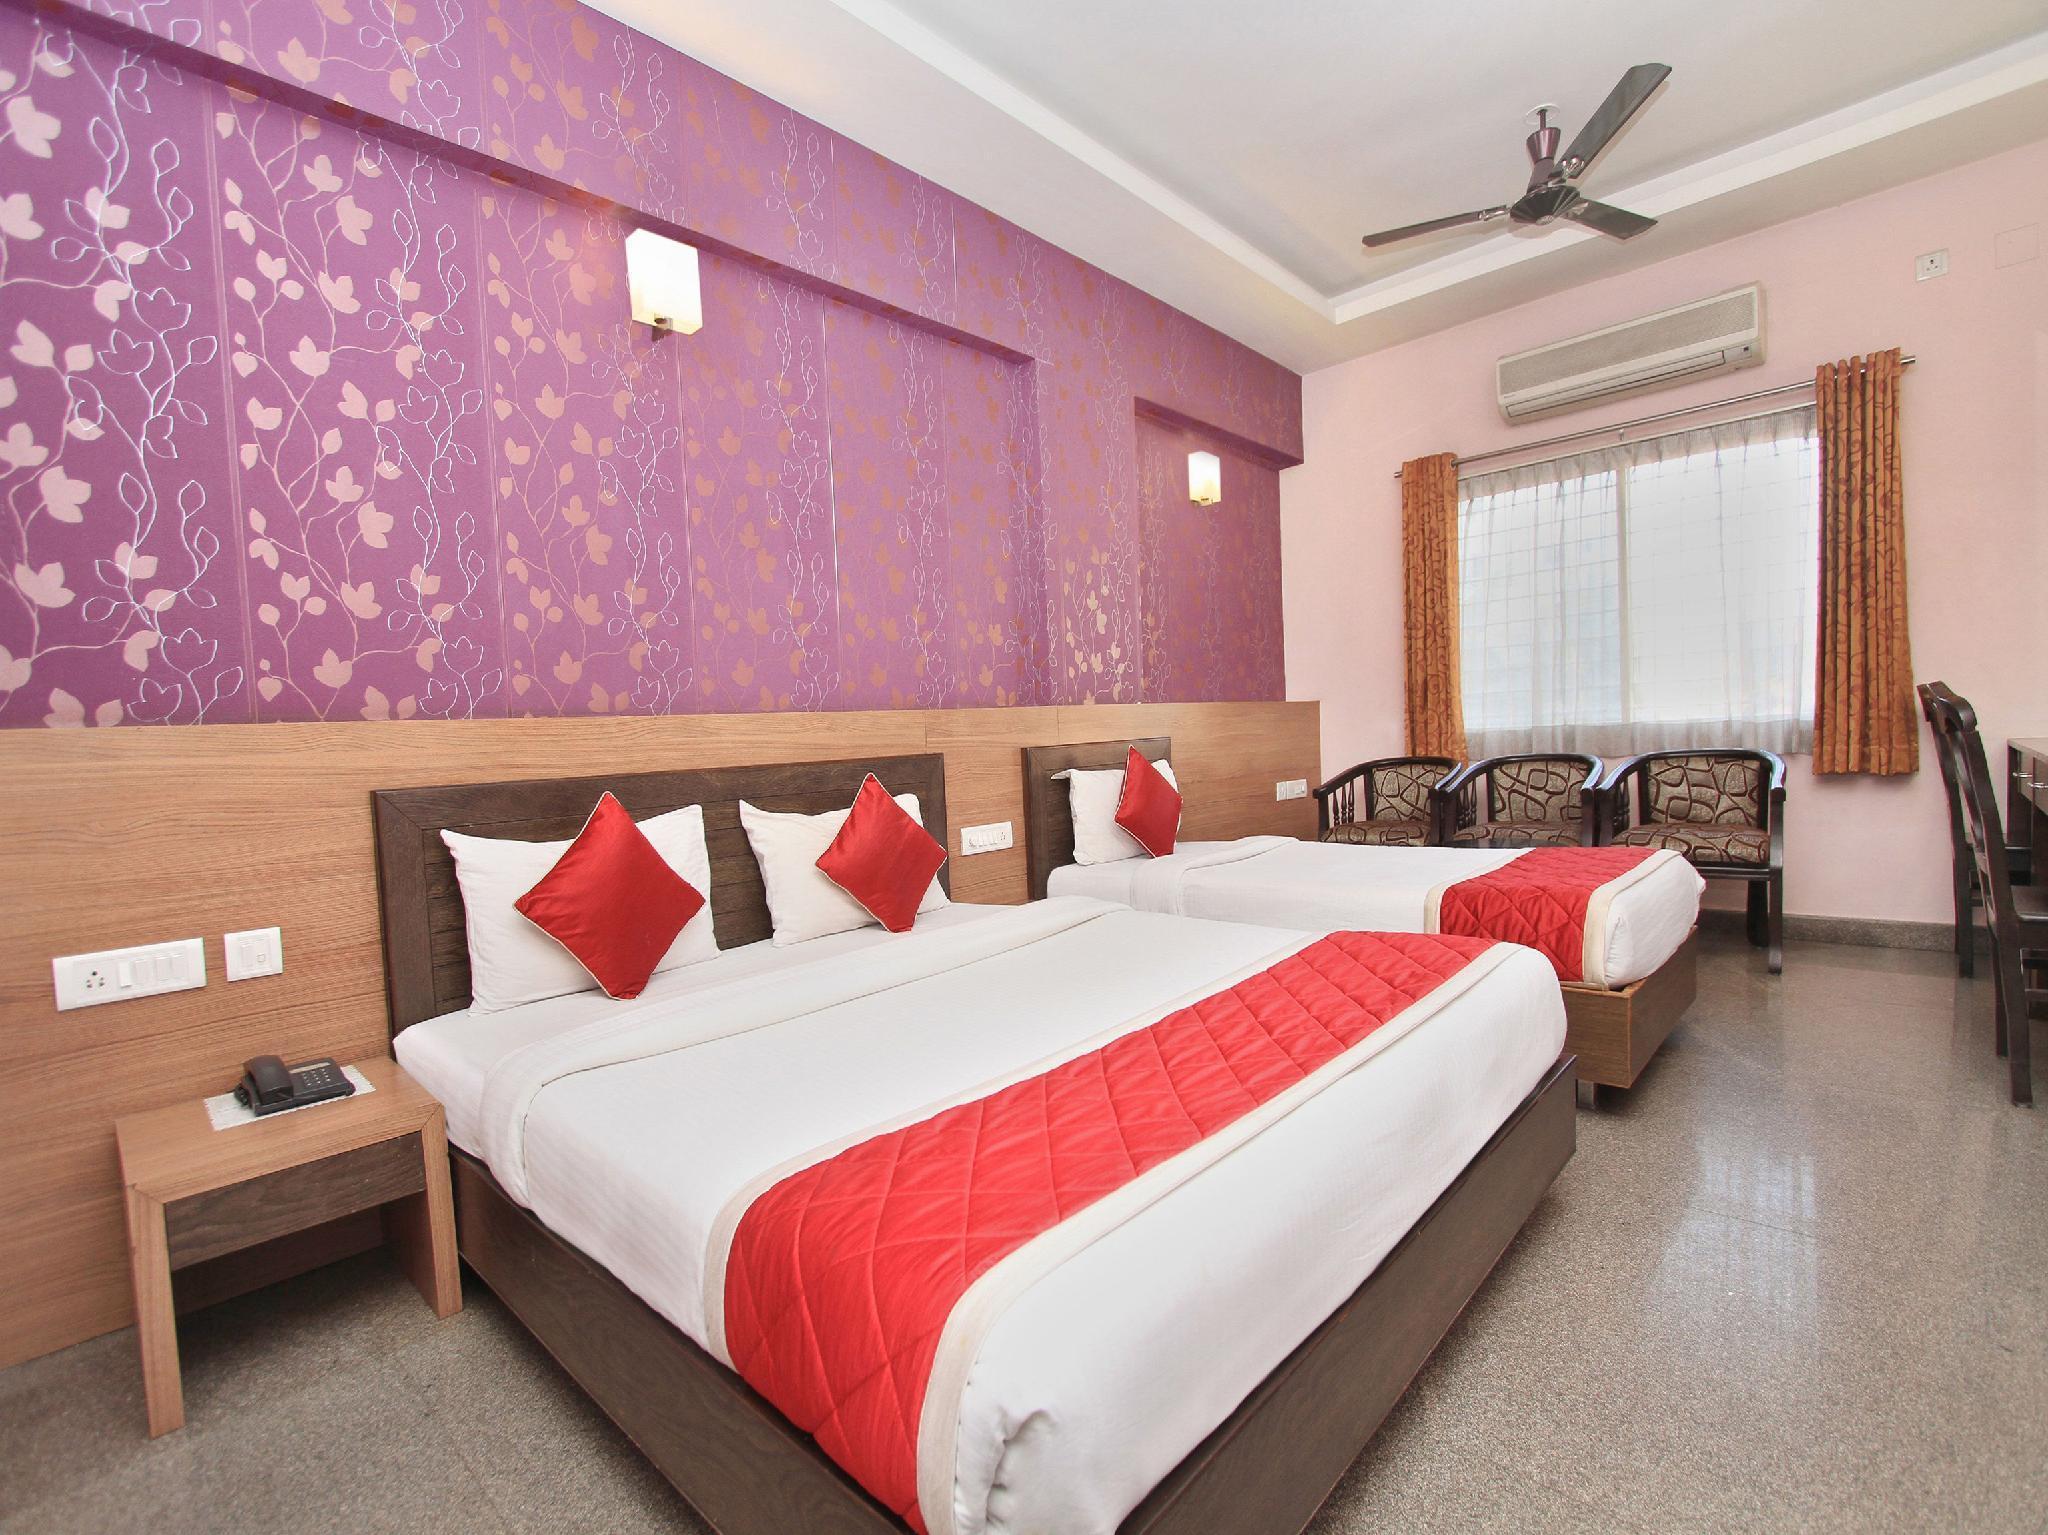 4 Bedroom Apartment Stay for 15 Pax for Parties and Events Hotel Bangalore  - Reviews, Photos & Offer